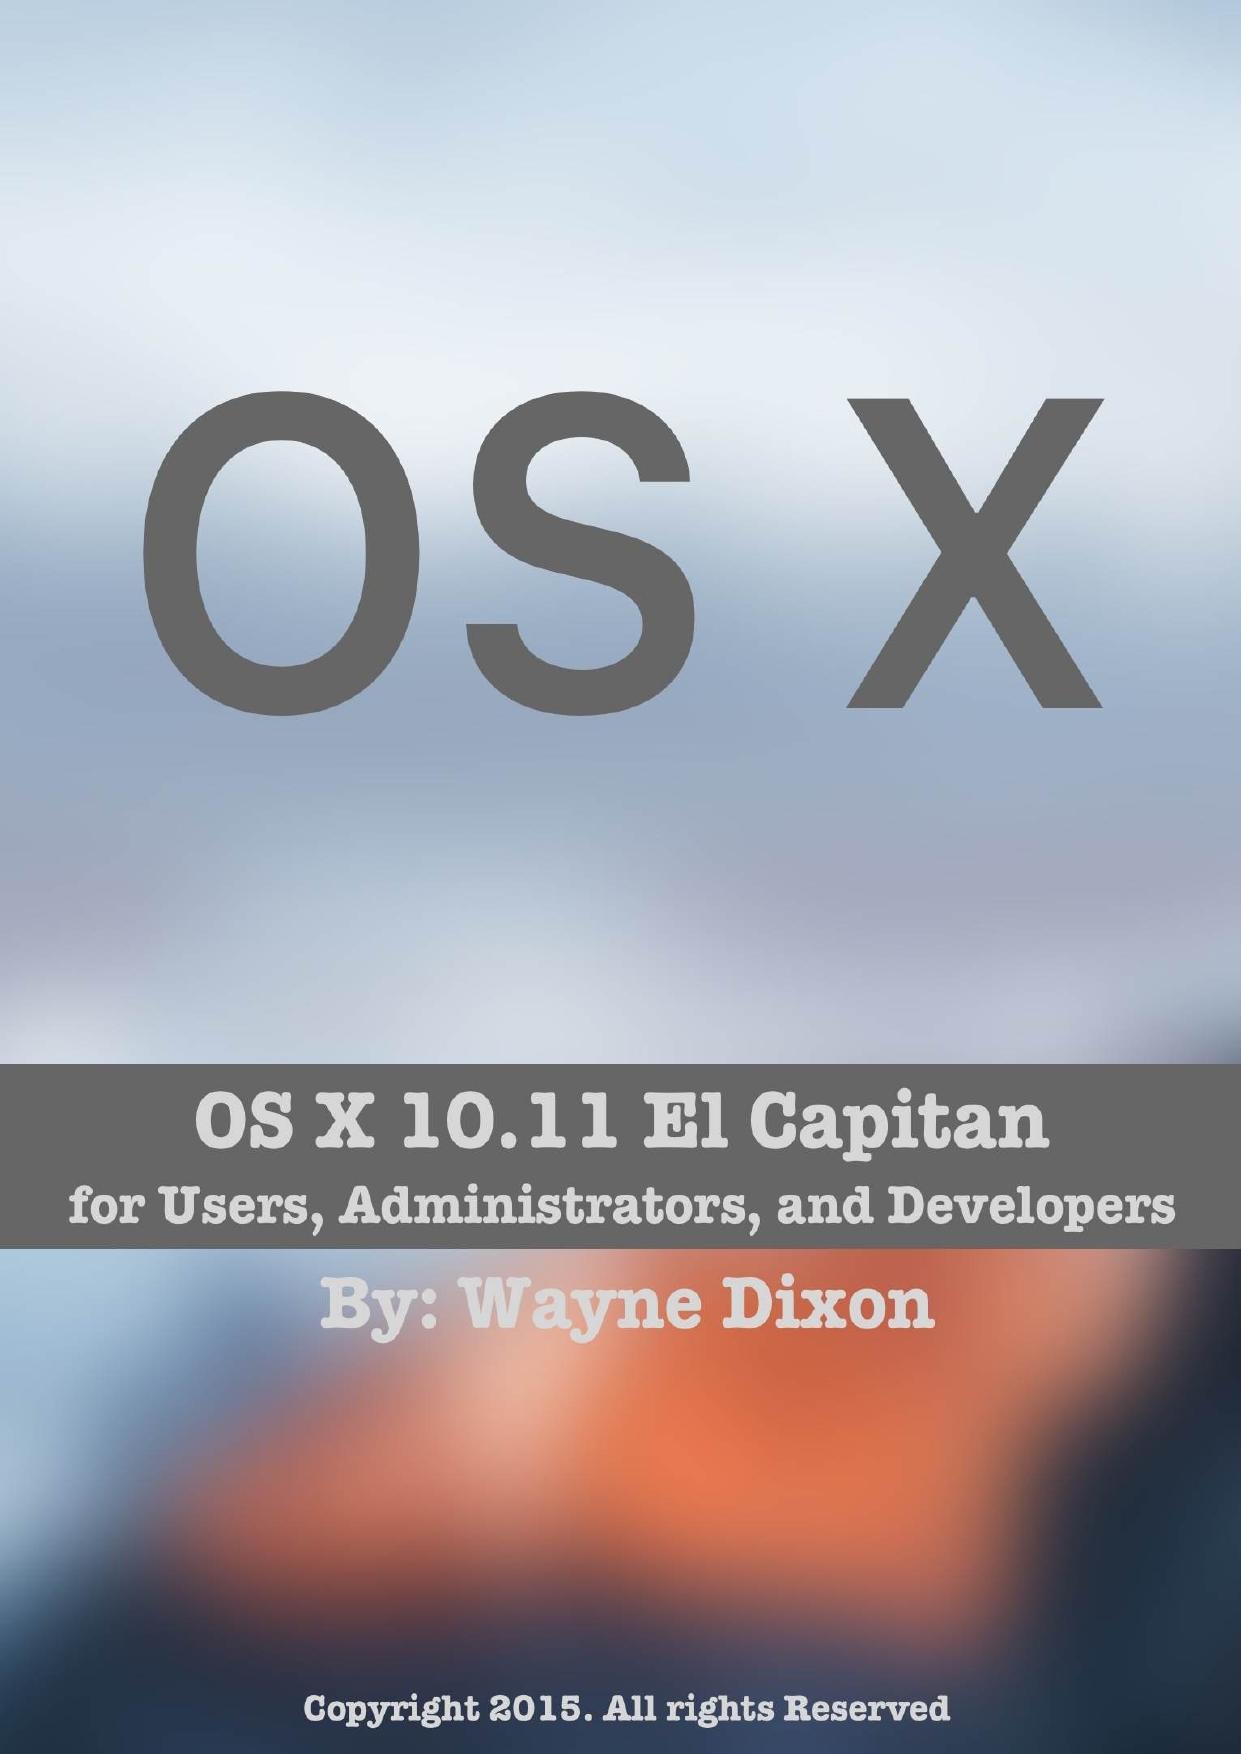 OS X 10.11 El Capitan for Users, Administrators and Developers by Wayne Dixon